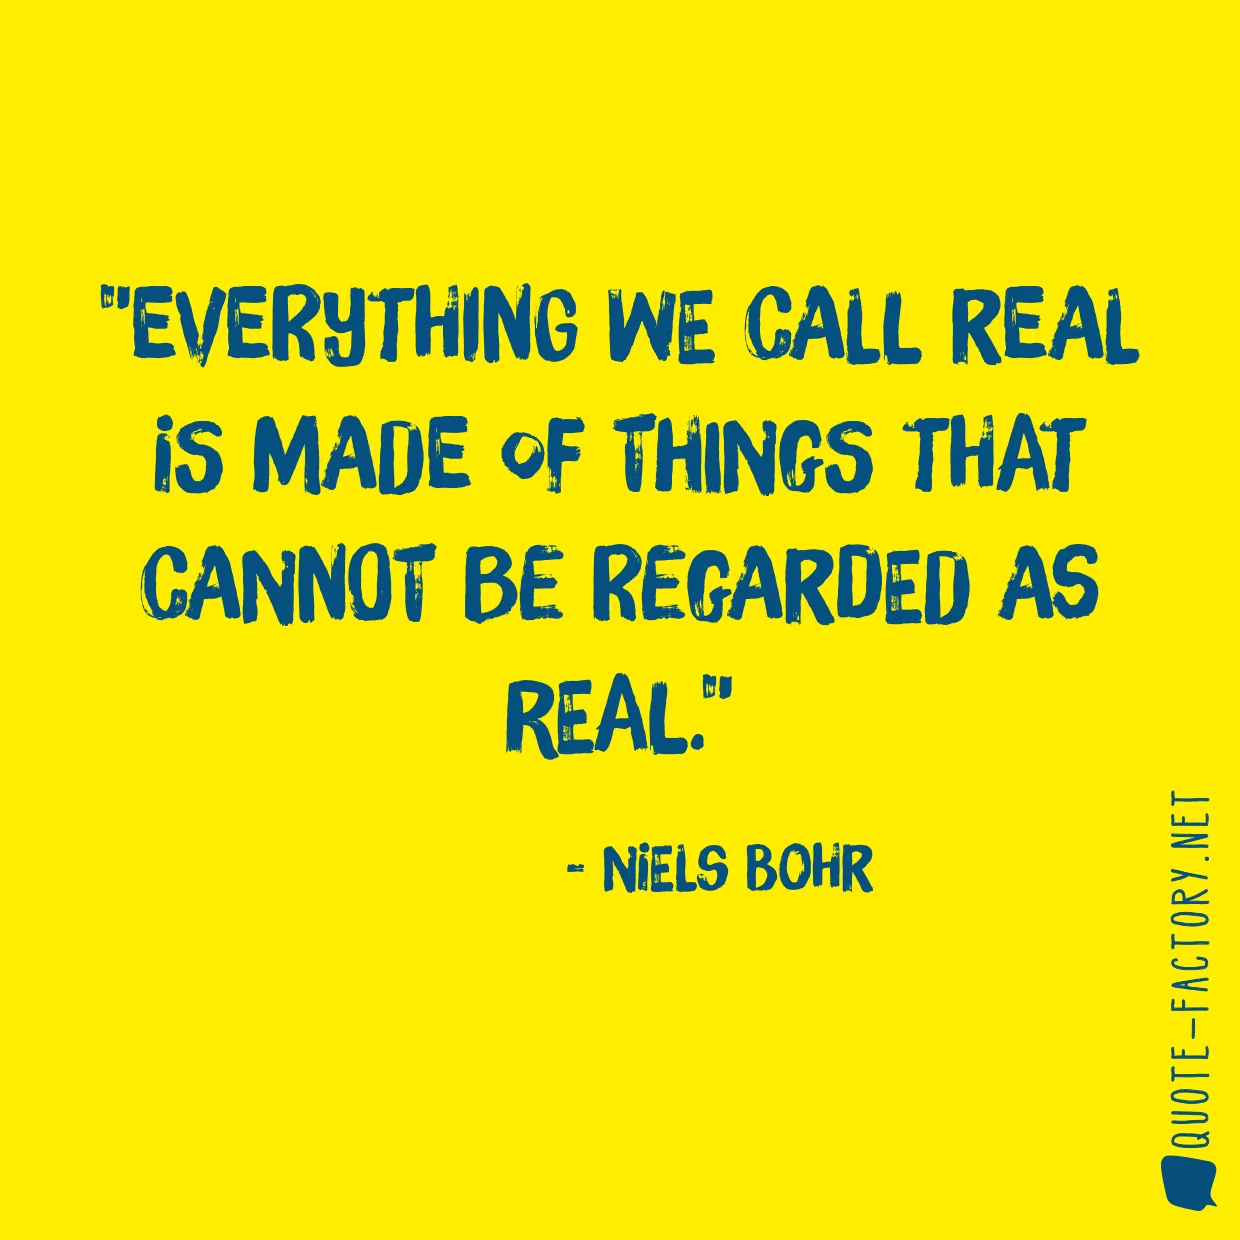 Everything we call real is made of things that cannot be regarded as real.